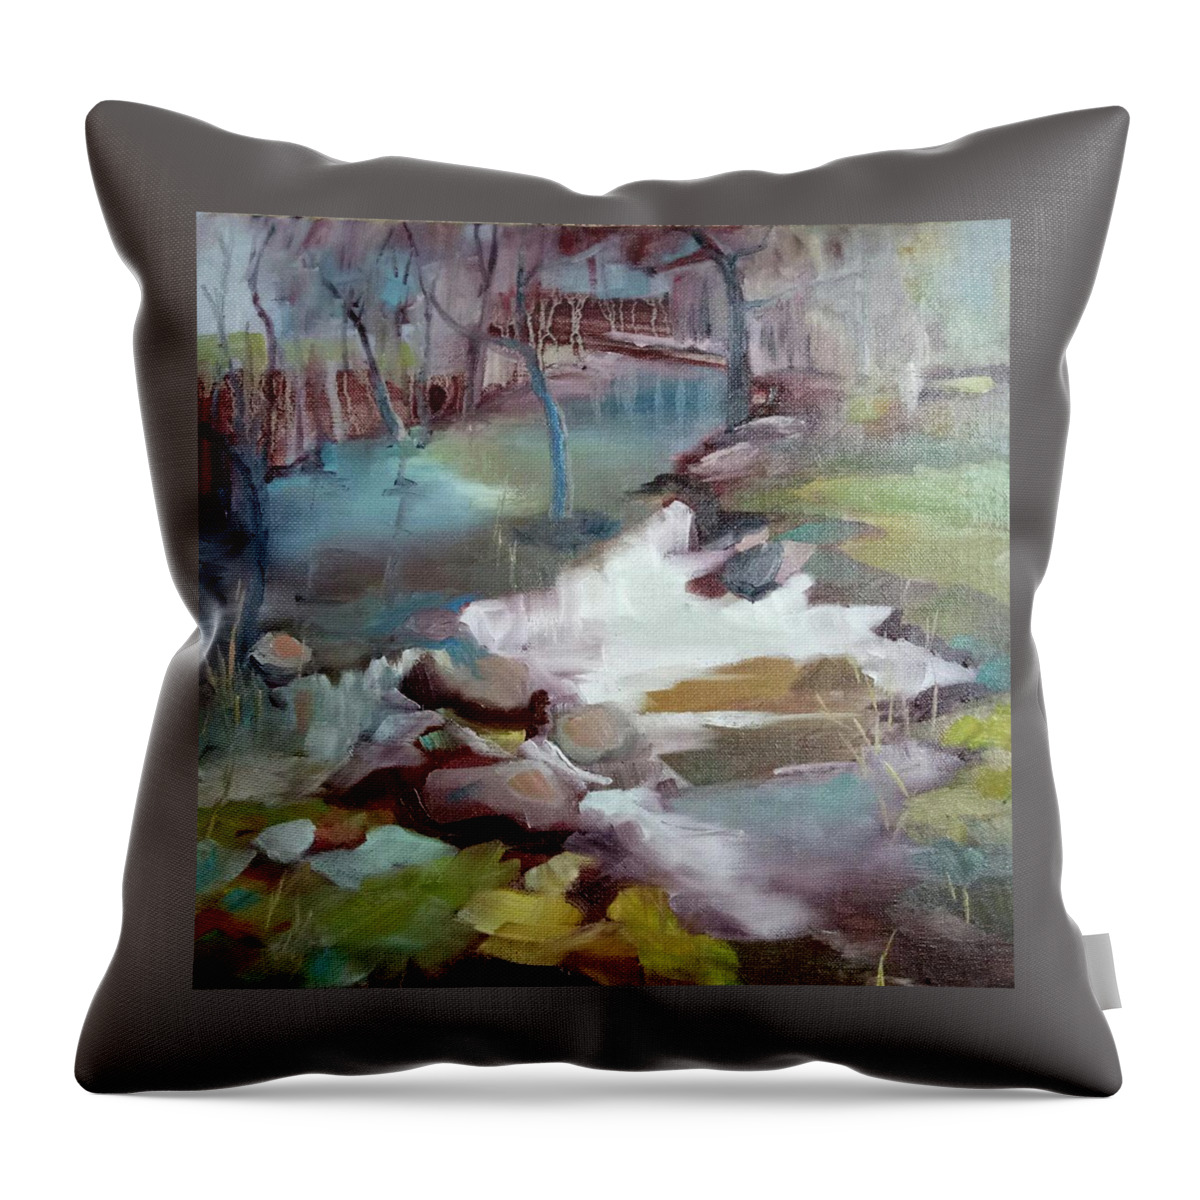  Throw Pillow featuring the painting Dreaming place by Kim PARDON